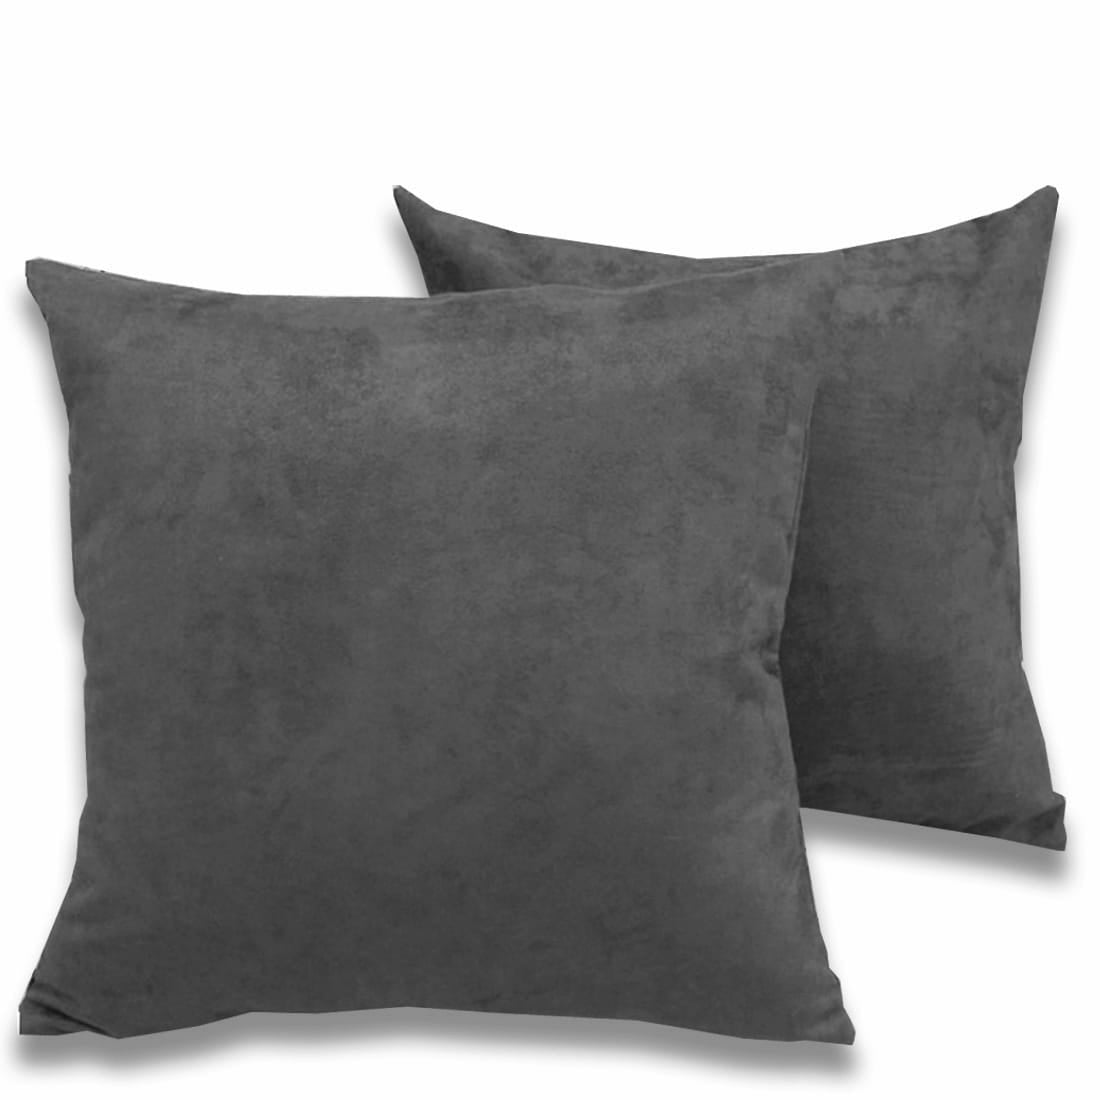 Luxurious Microfiber Suede Velvet Cushion Cover Set in Charcoal online in India